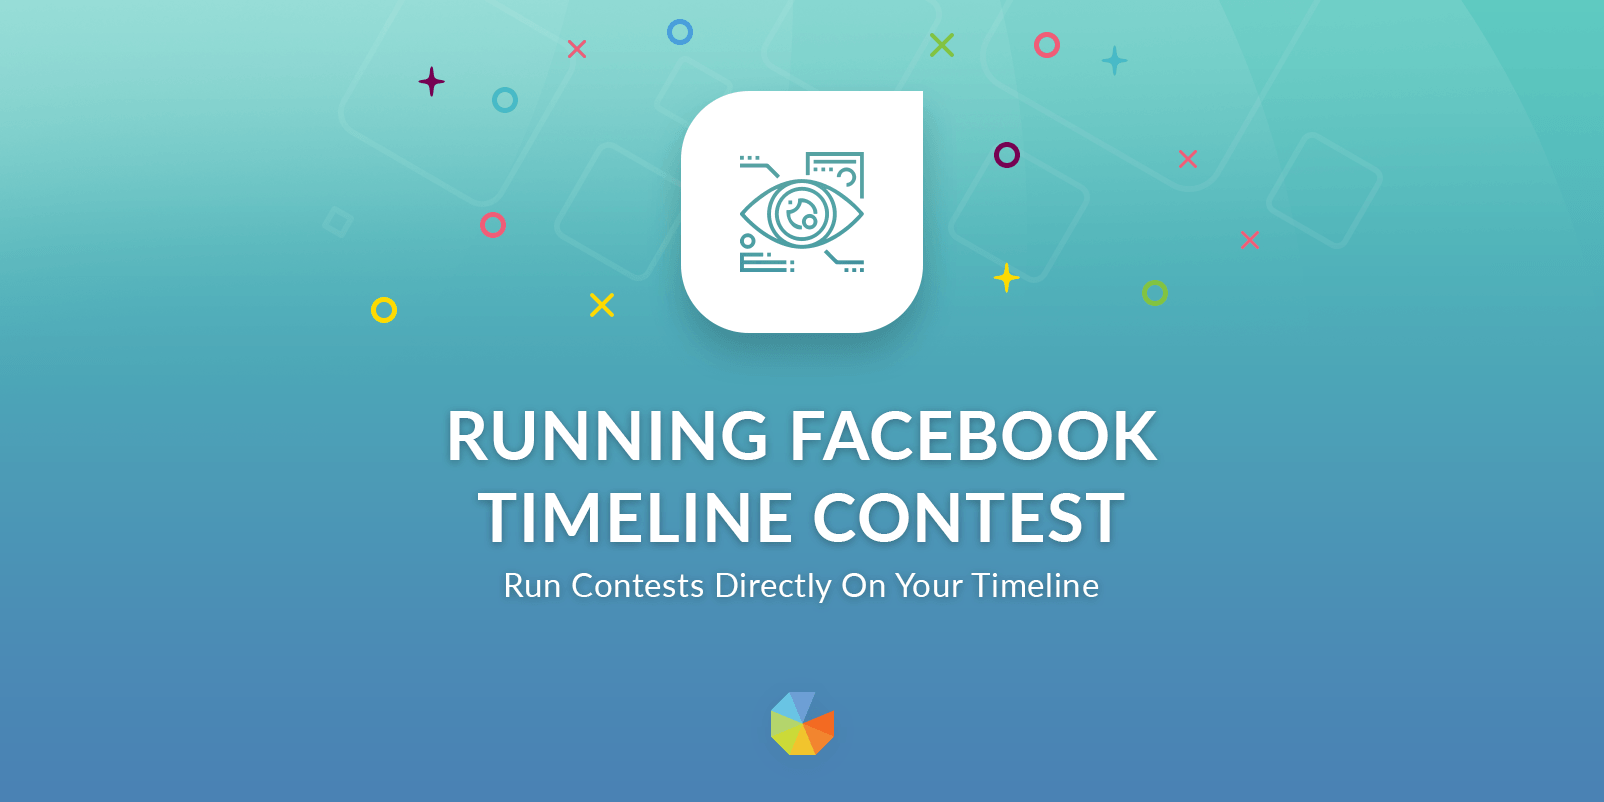 Running Facebook Timeline Contest: Run Contests Directly on Your Timeline